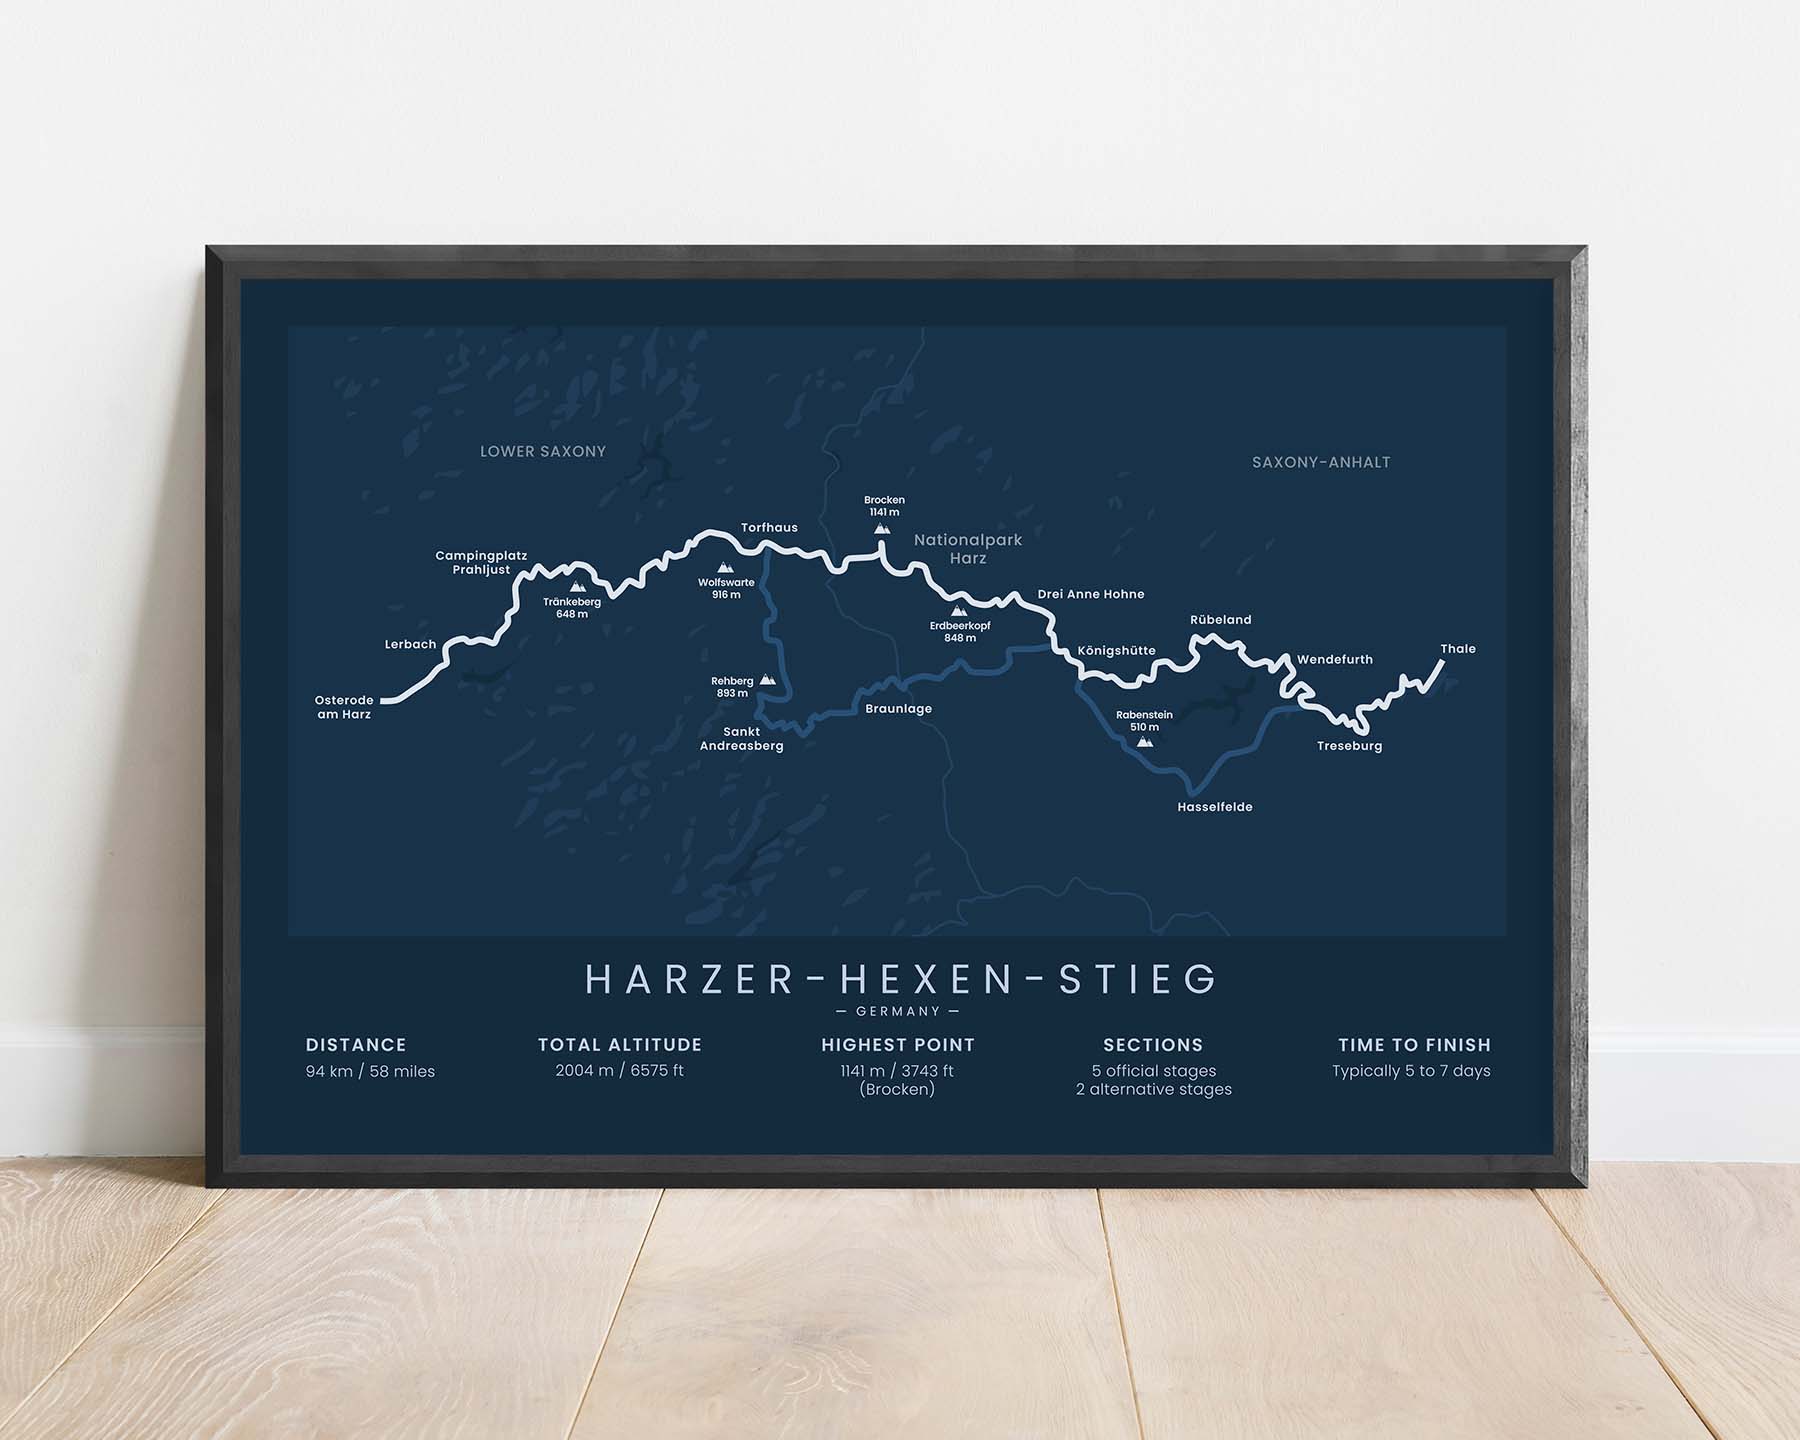 Harzer-Hexen-Stieg (Osterode Am Harz to Thale) Path Print with Blue Background in Minimal Room Decor